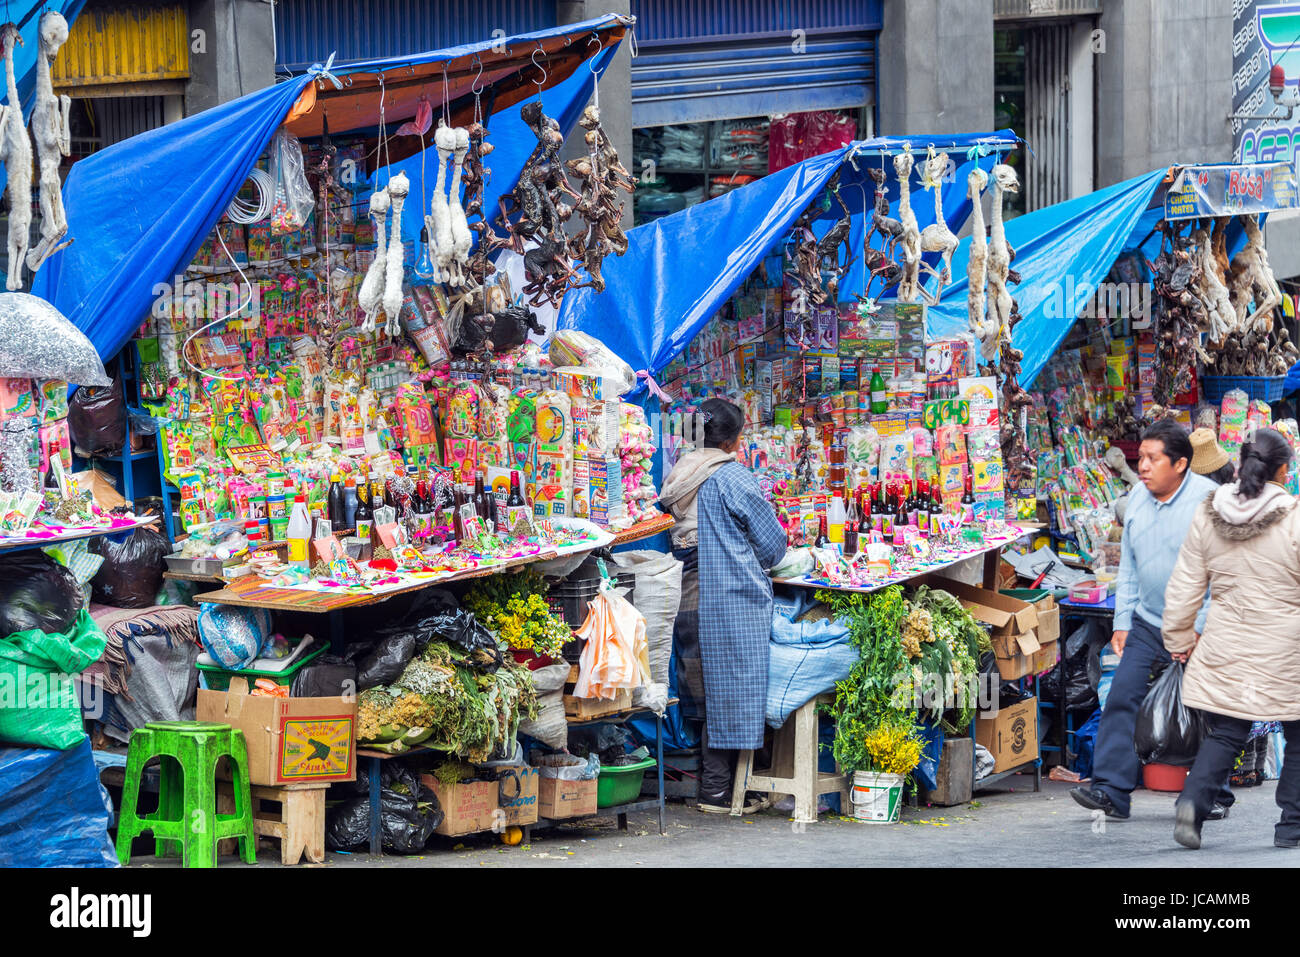 LA PAZ, BOLIVIA - AUGUST 13:  View of the Witches Market, which sells llama fetuses among other things in La Paz on August 13, 2014 Stock Photo